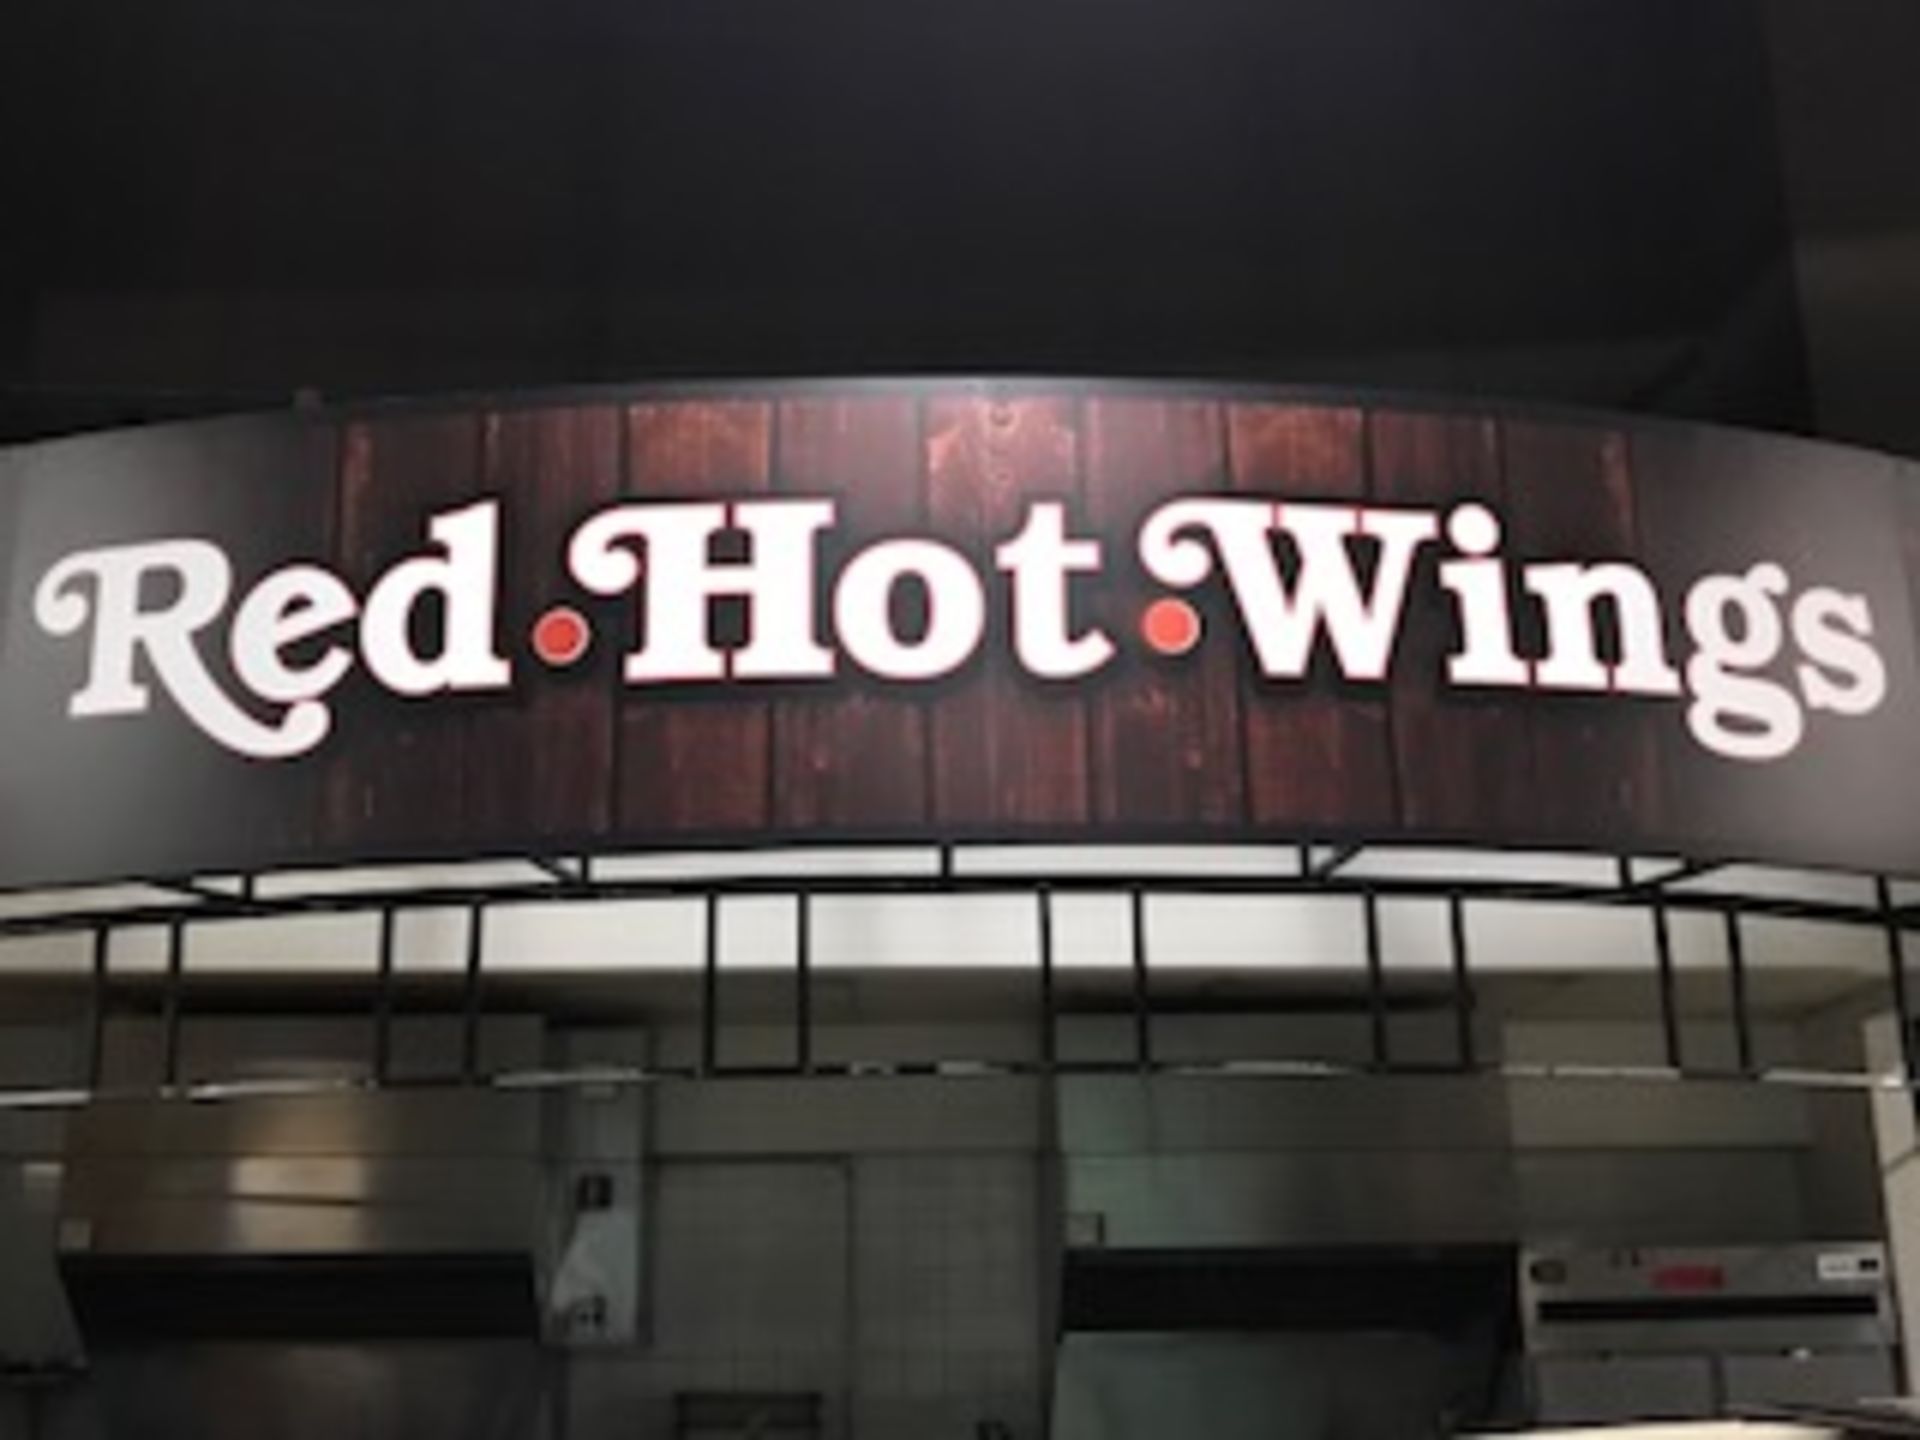 Sign - "Red Hot Wings" (2 Pcs.) 16 ft. w x 44 in. h ; Located in: Main Concourse ***Note from